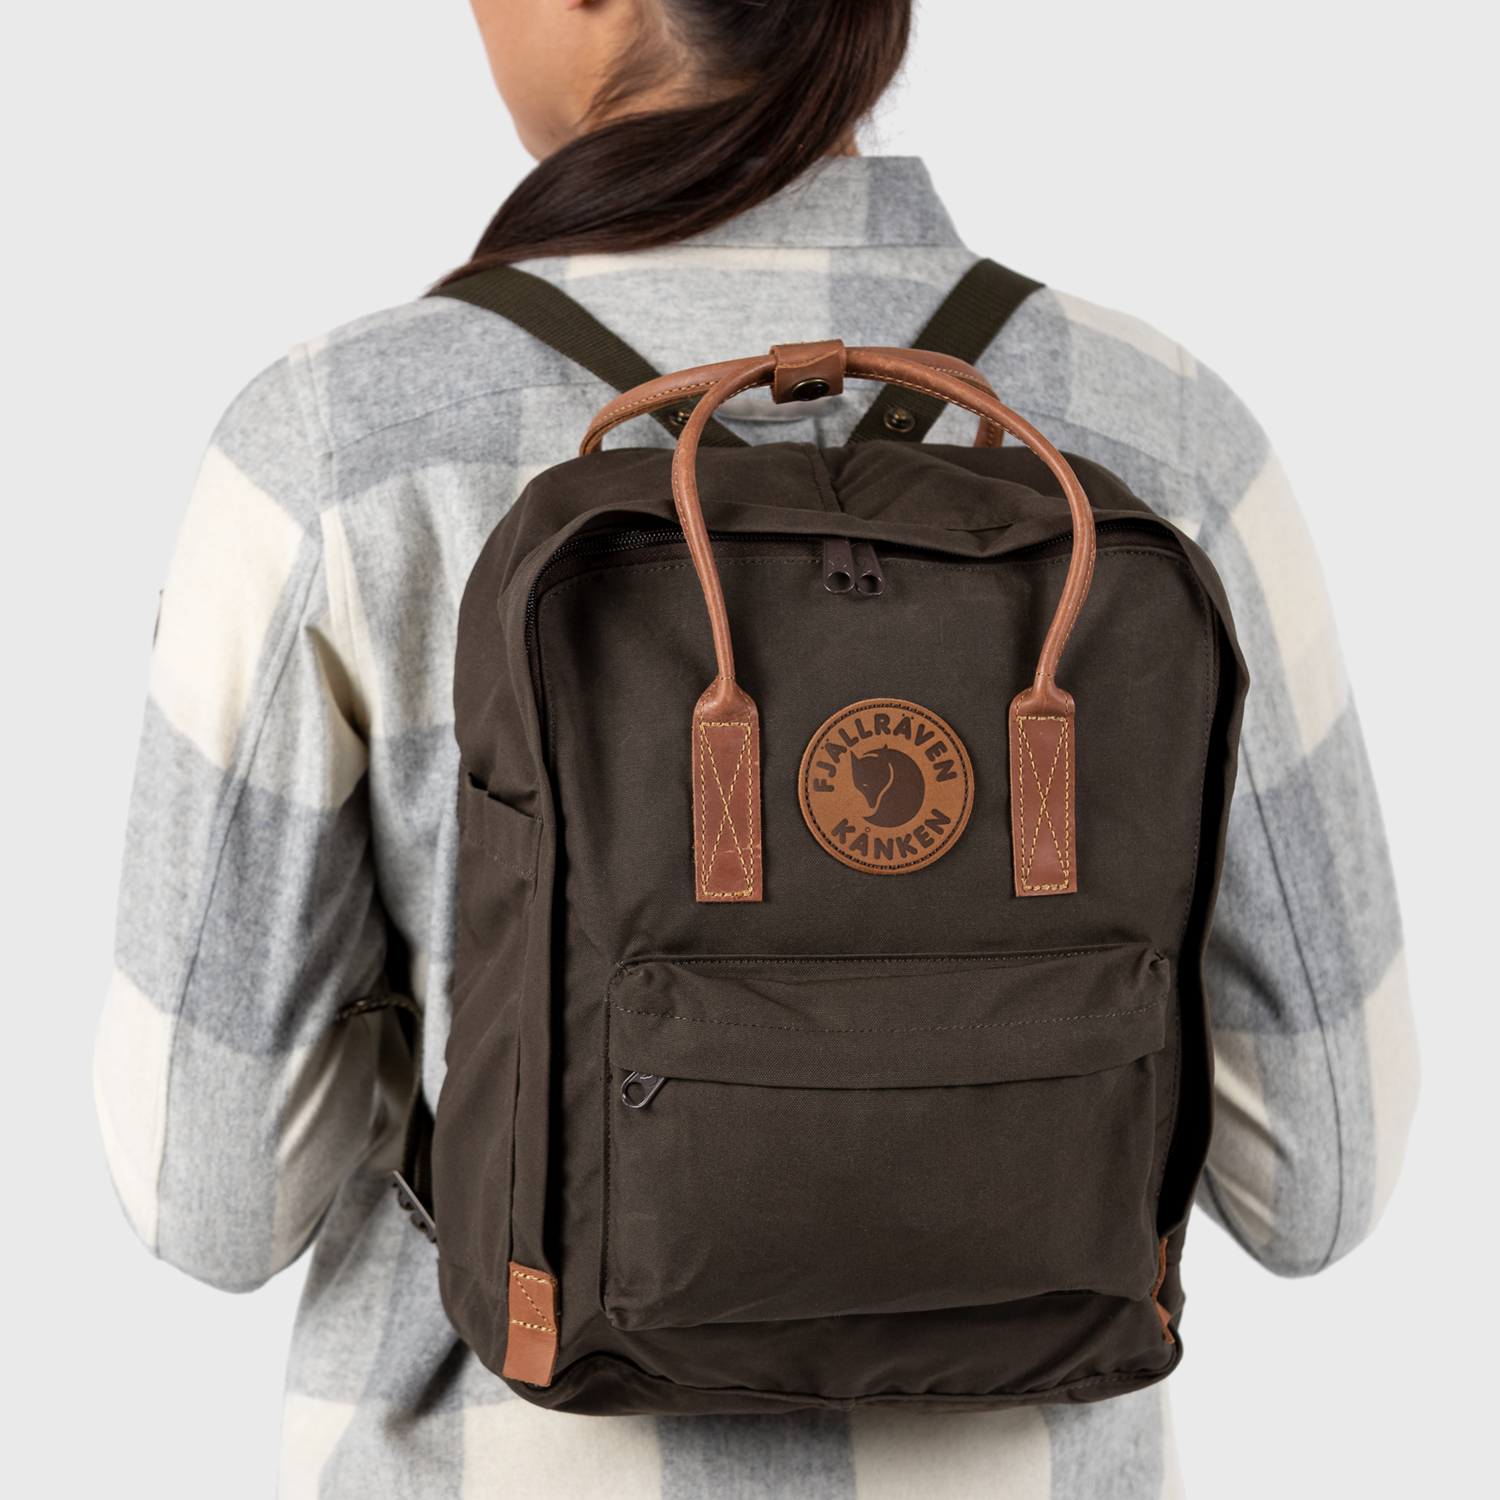 branded durable backpack for college